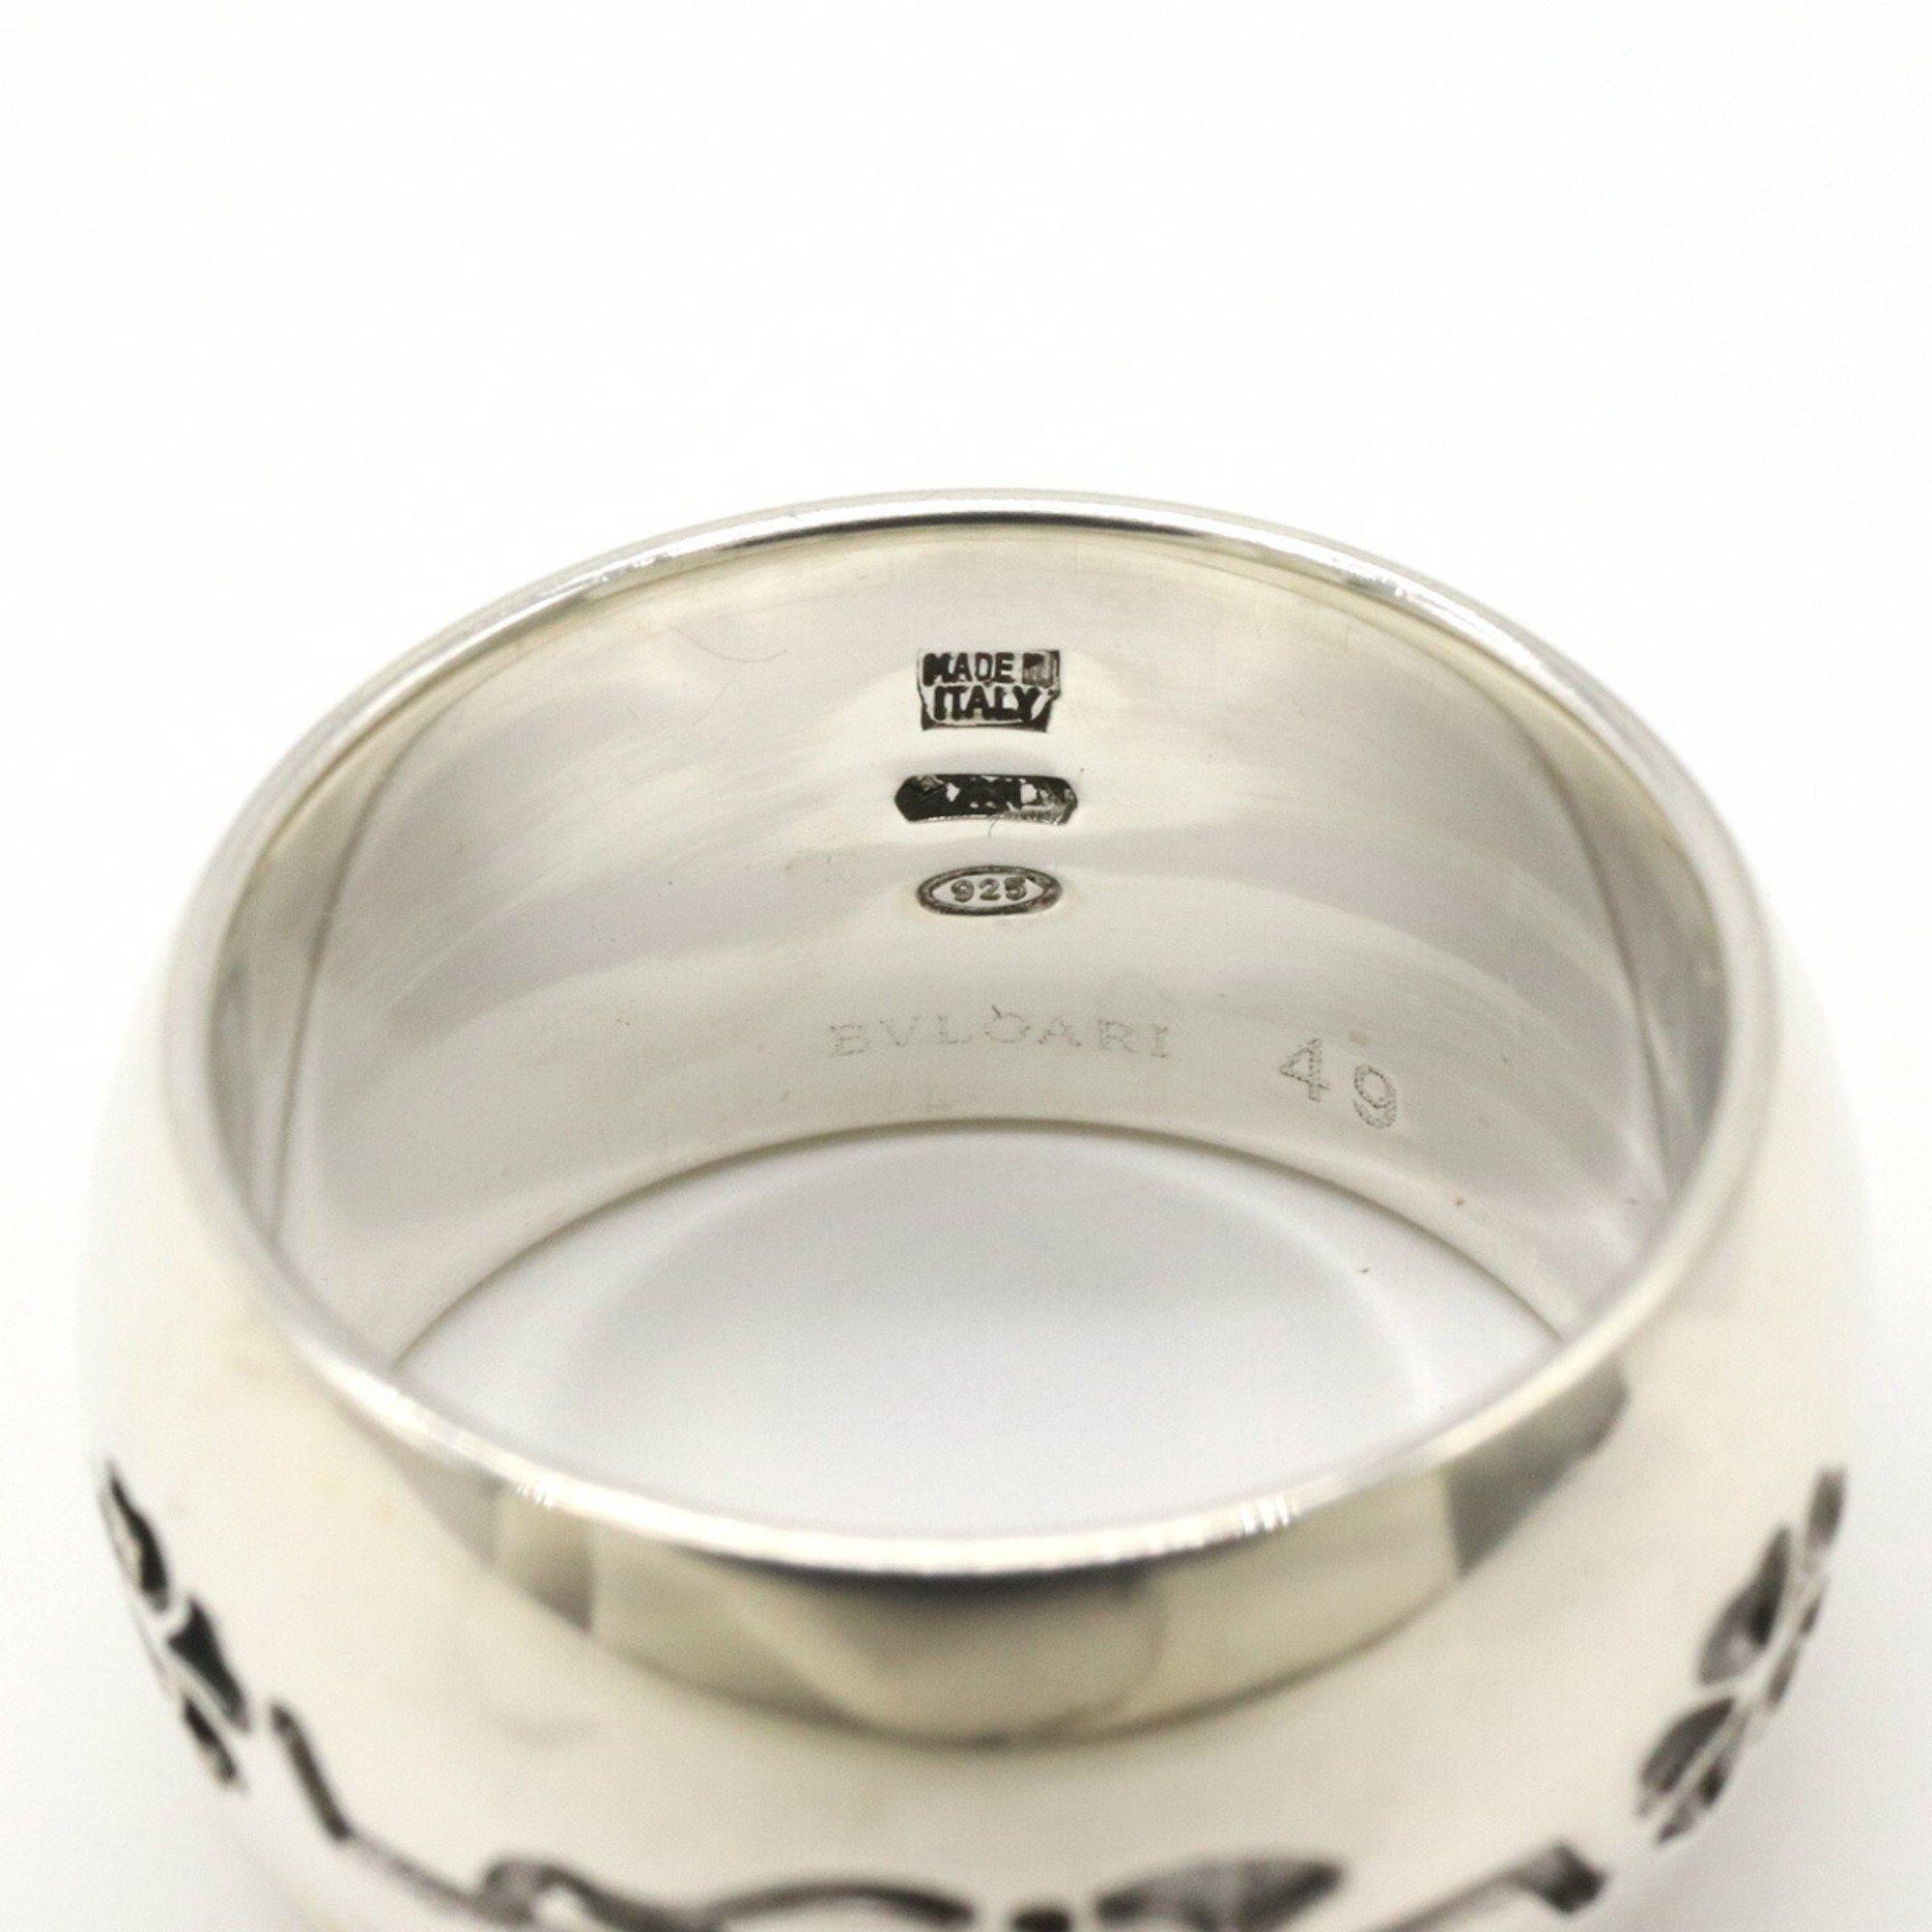 BVLGARI Save the Children Sotirio Ring Charity SV925 Silver #49 Japanese Size Approx. 10